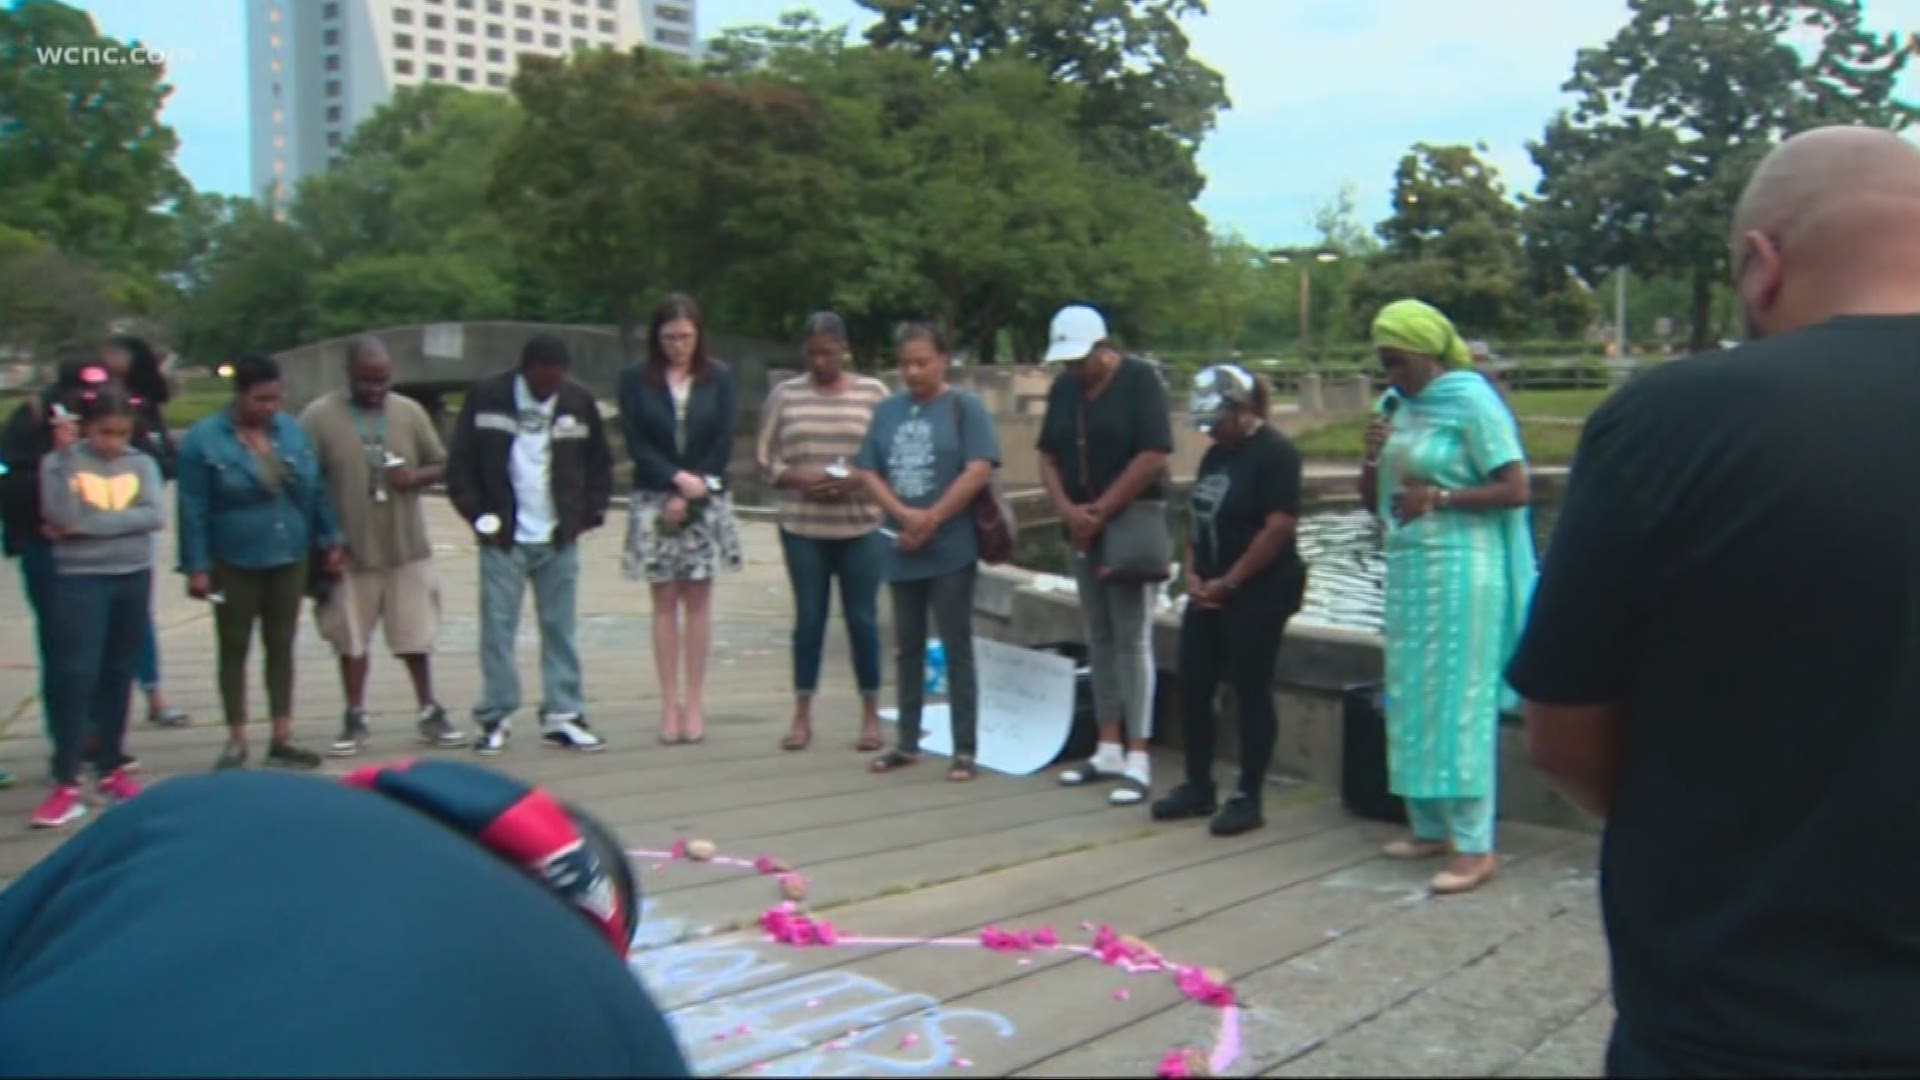 Franklin's family and others came together at Marshall Park to remember him at a prayer vigil one day after CMPD released the full body camera video of that deadly shooting.